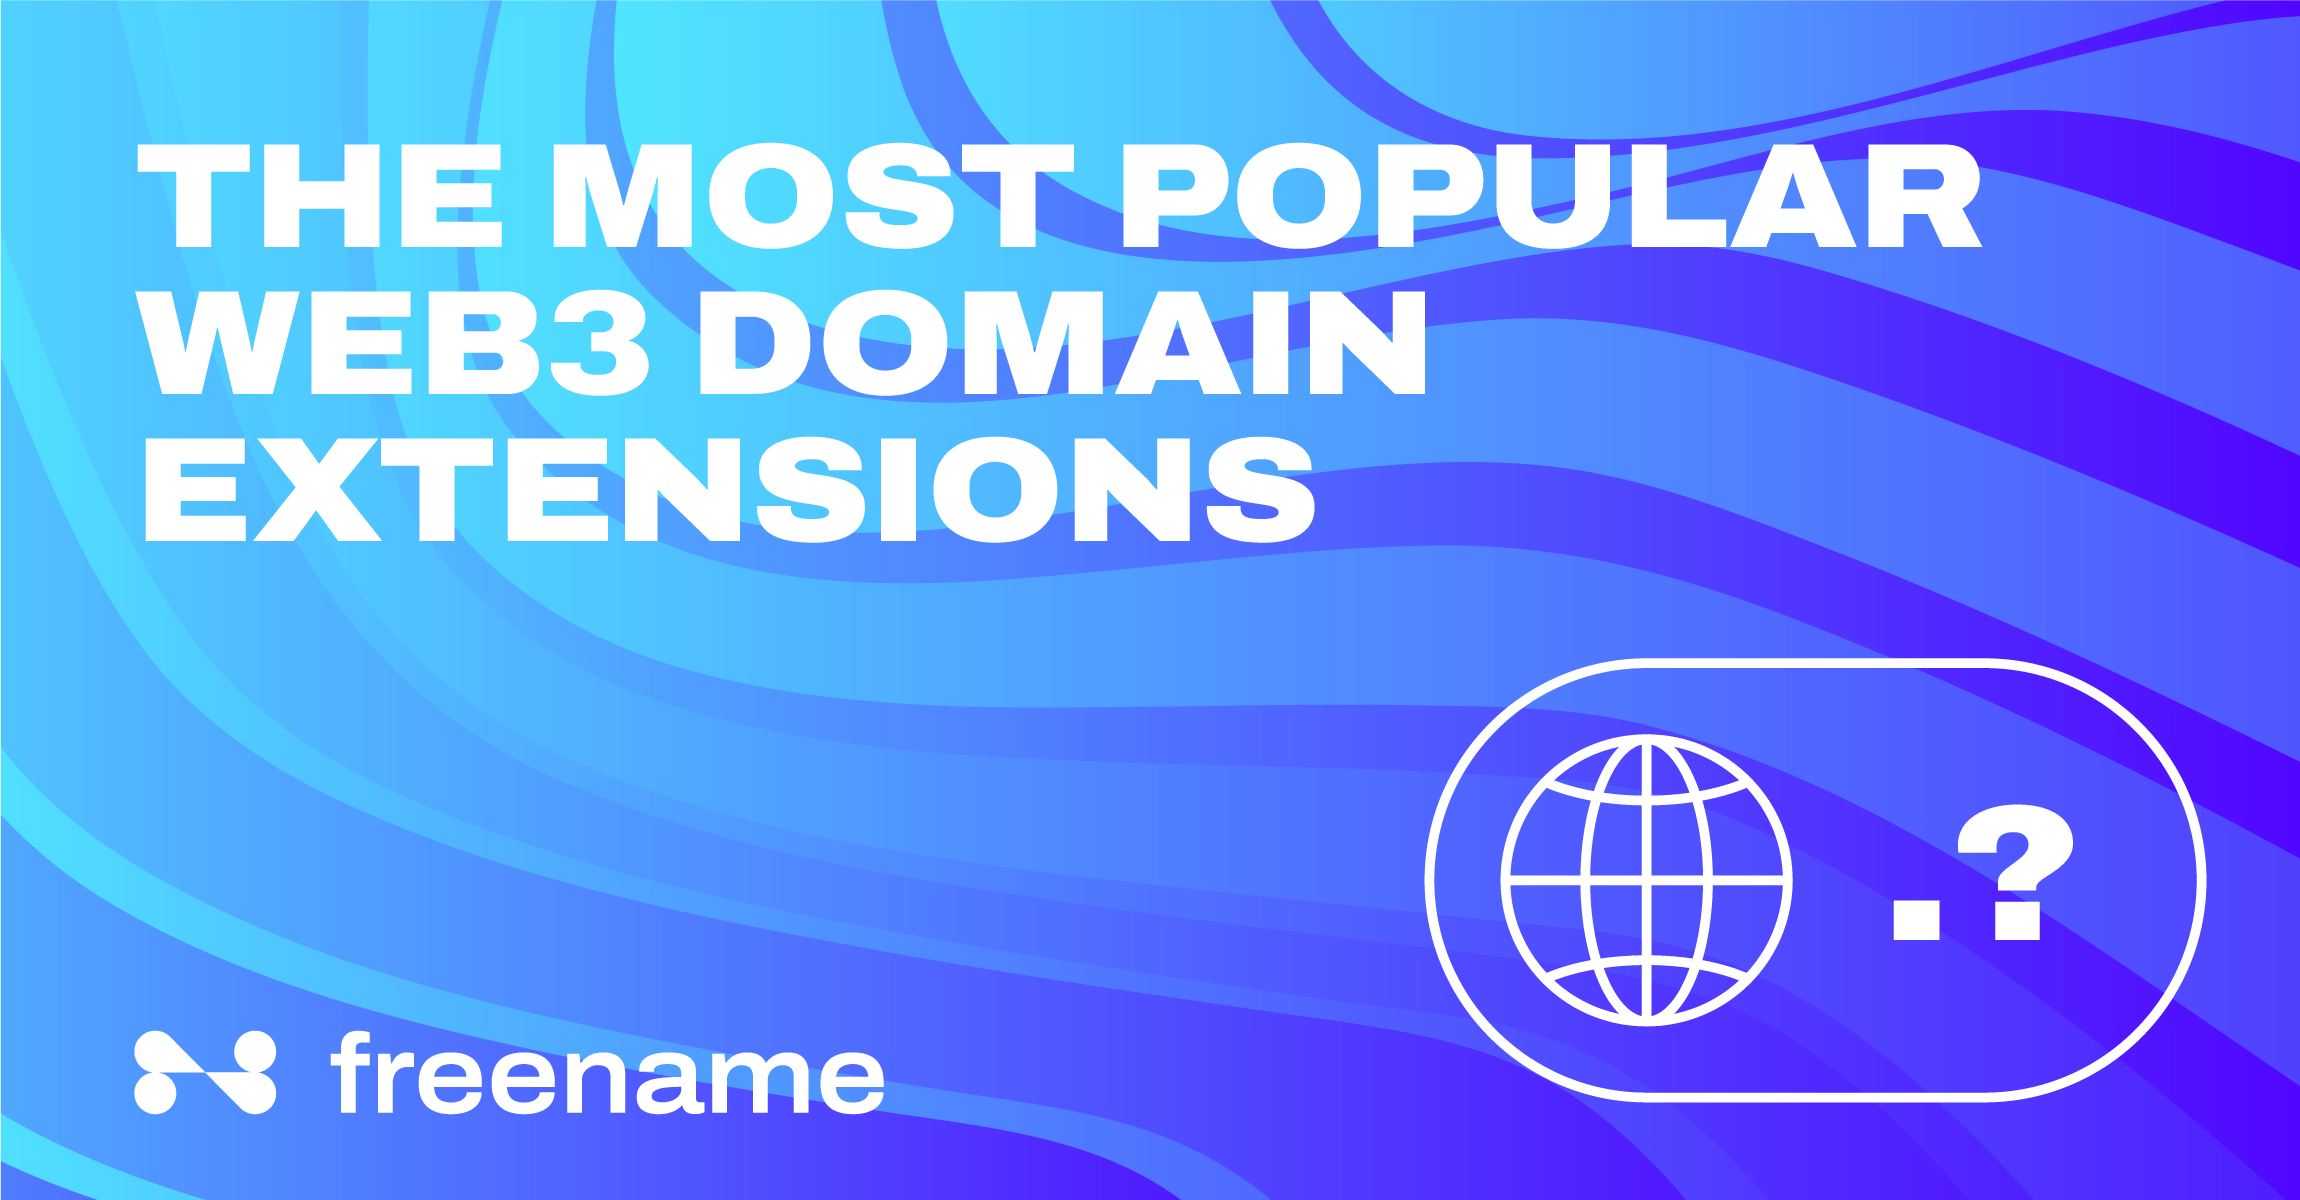 The Most Popular Web3 Domain Extensions